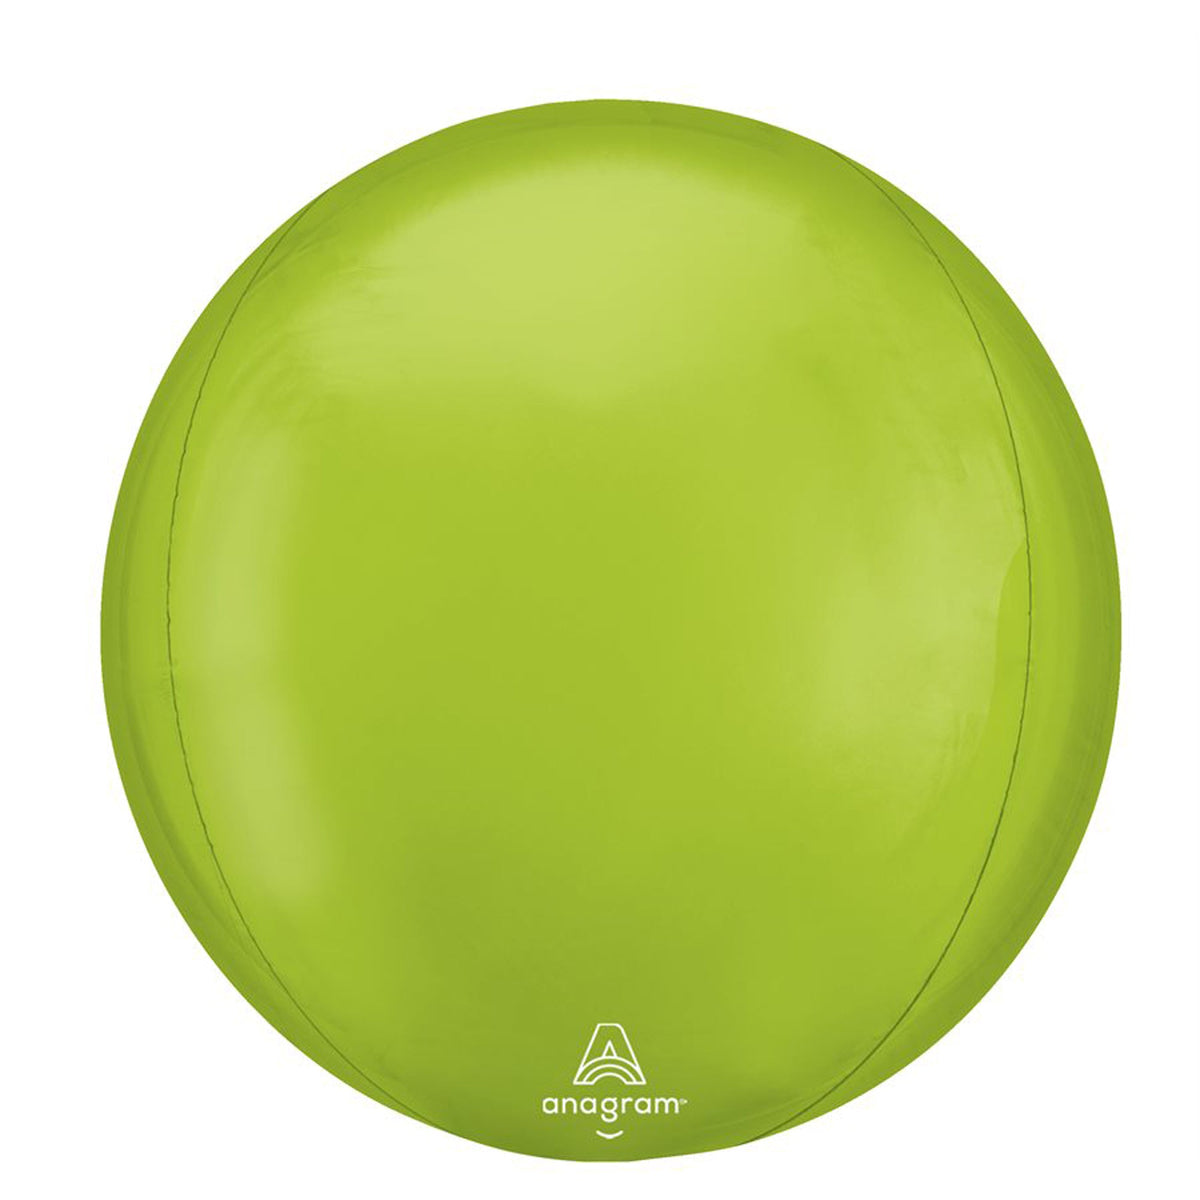 LE GROUPE BLC INTL INC Balloons Vibrant Green Orbz Balloon, 15 Inches, 1 Count